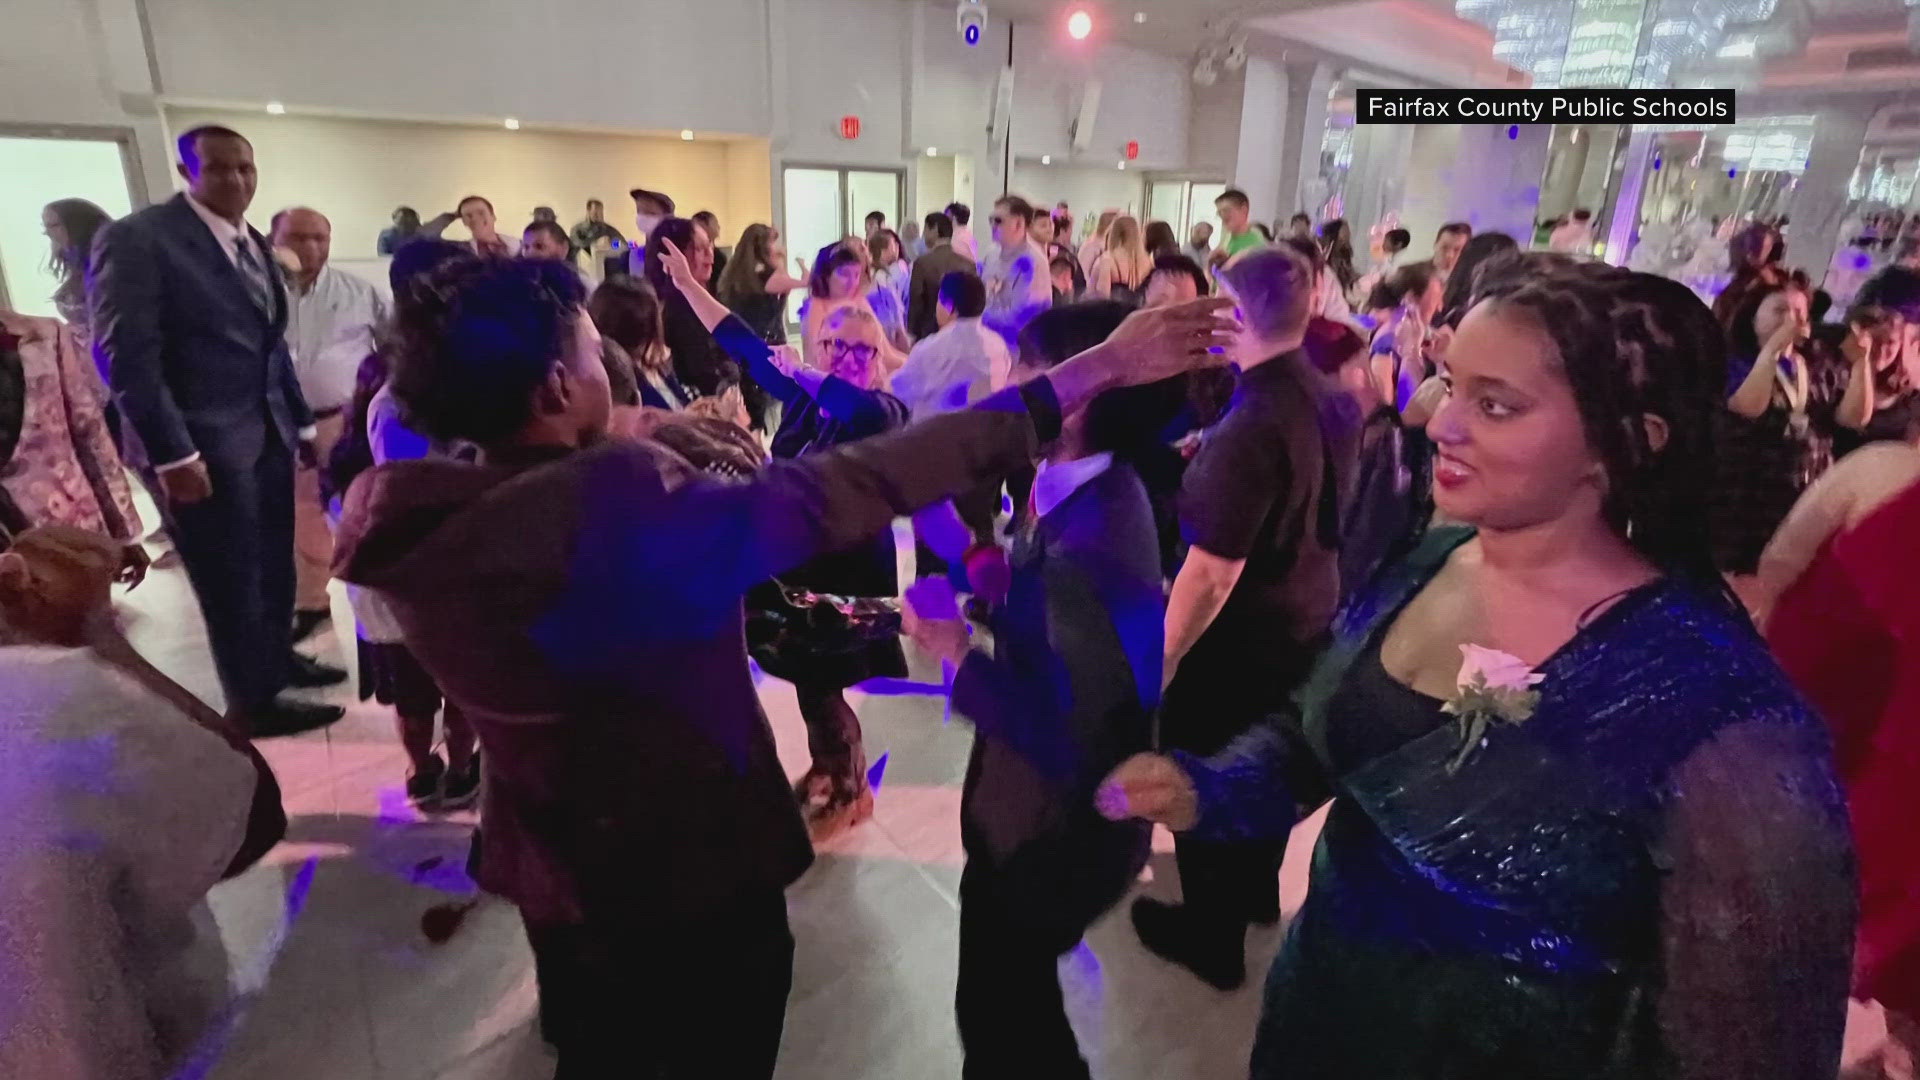 After a 5-year hiatus, FCPS held it's multi-school day prom for around 100 special education students.